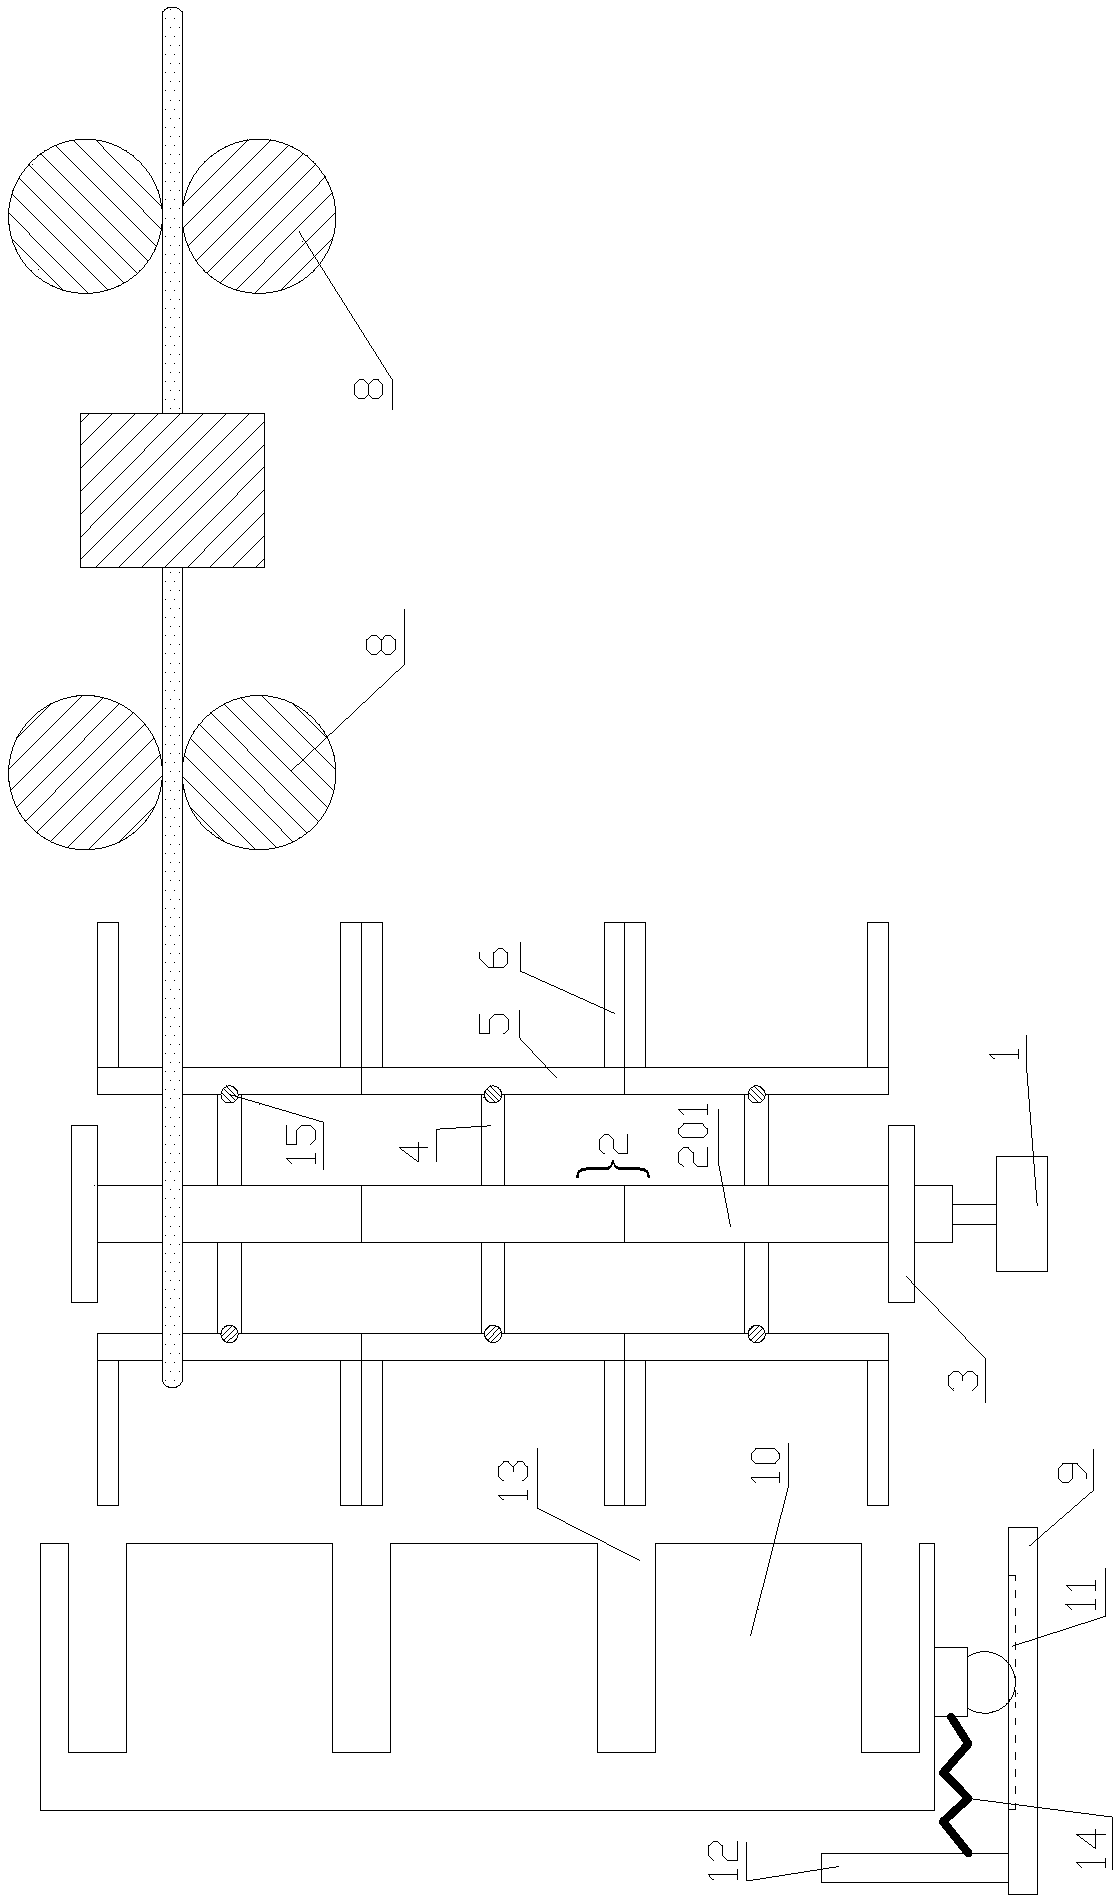 Automotive wire collection device